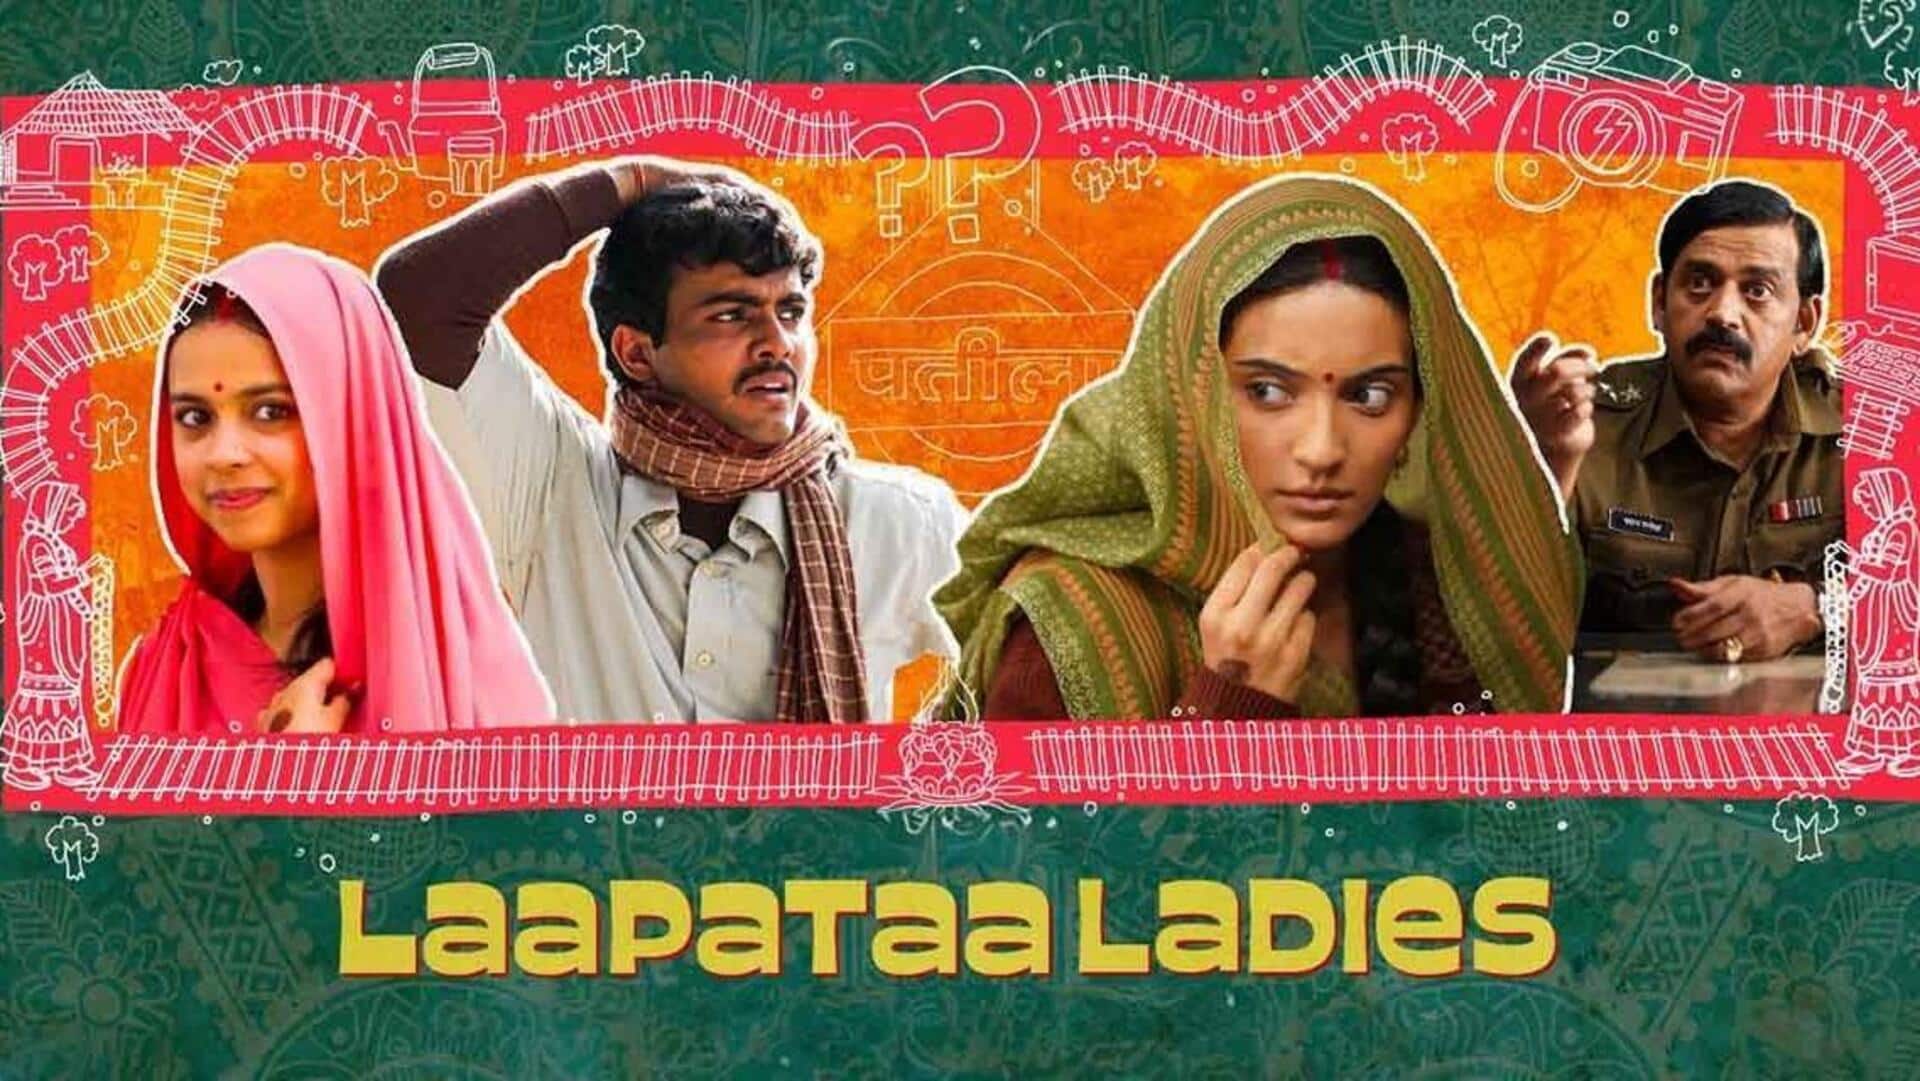 Box office collection: 'Laapataa Ladies' to exit theaters soon